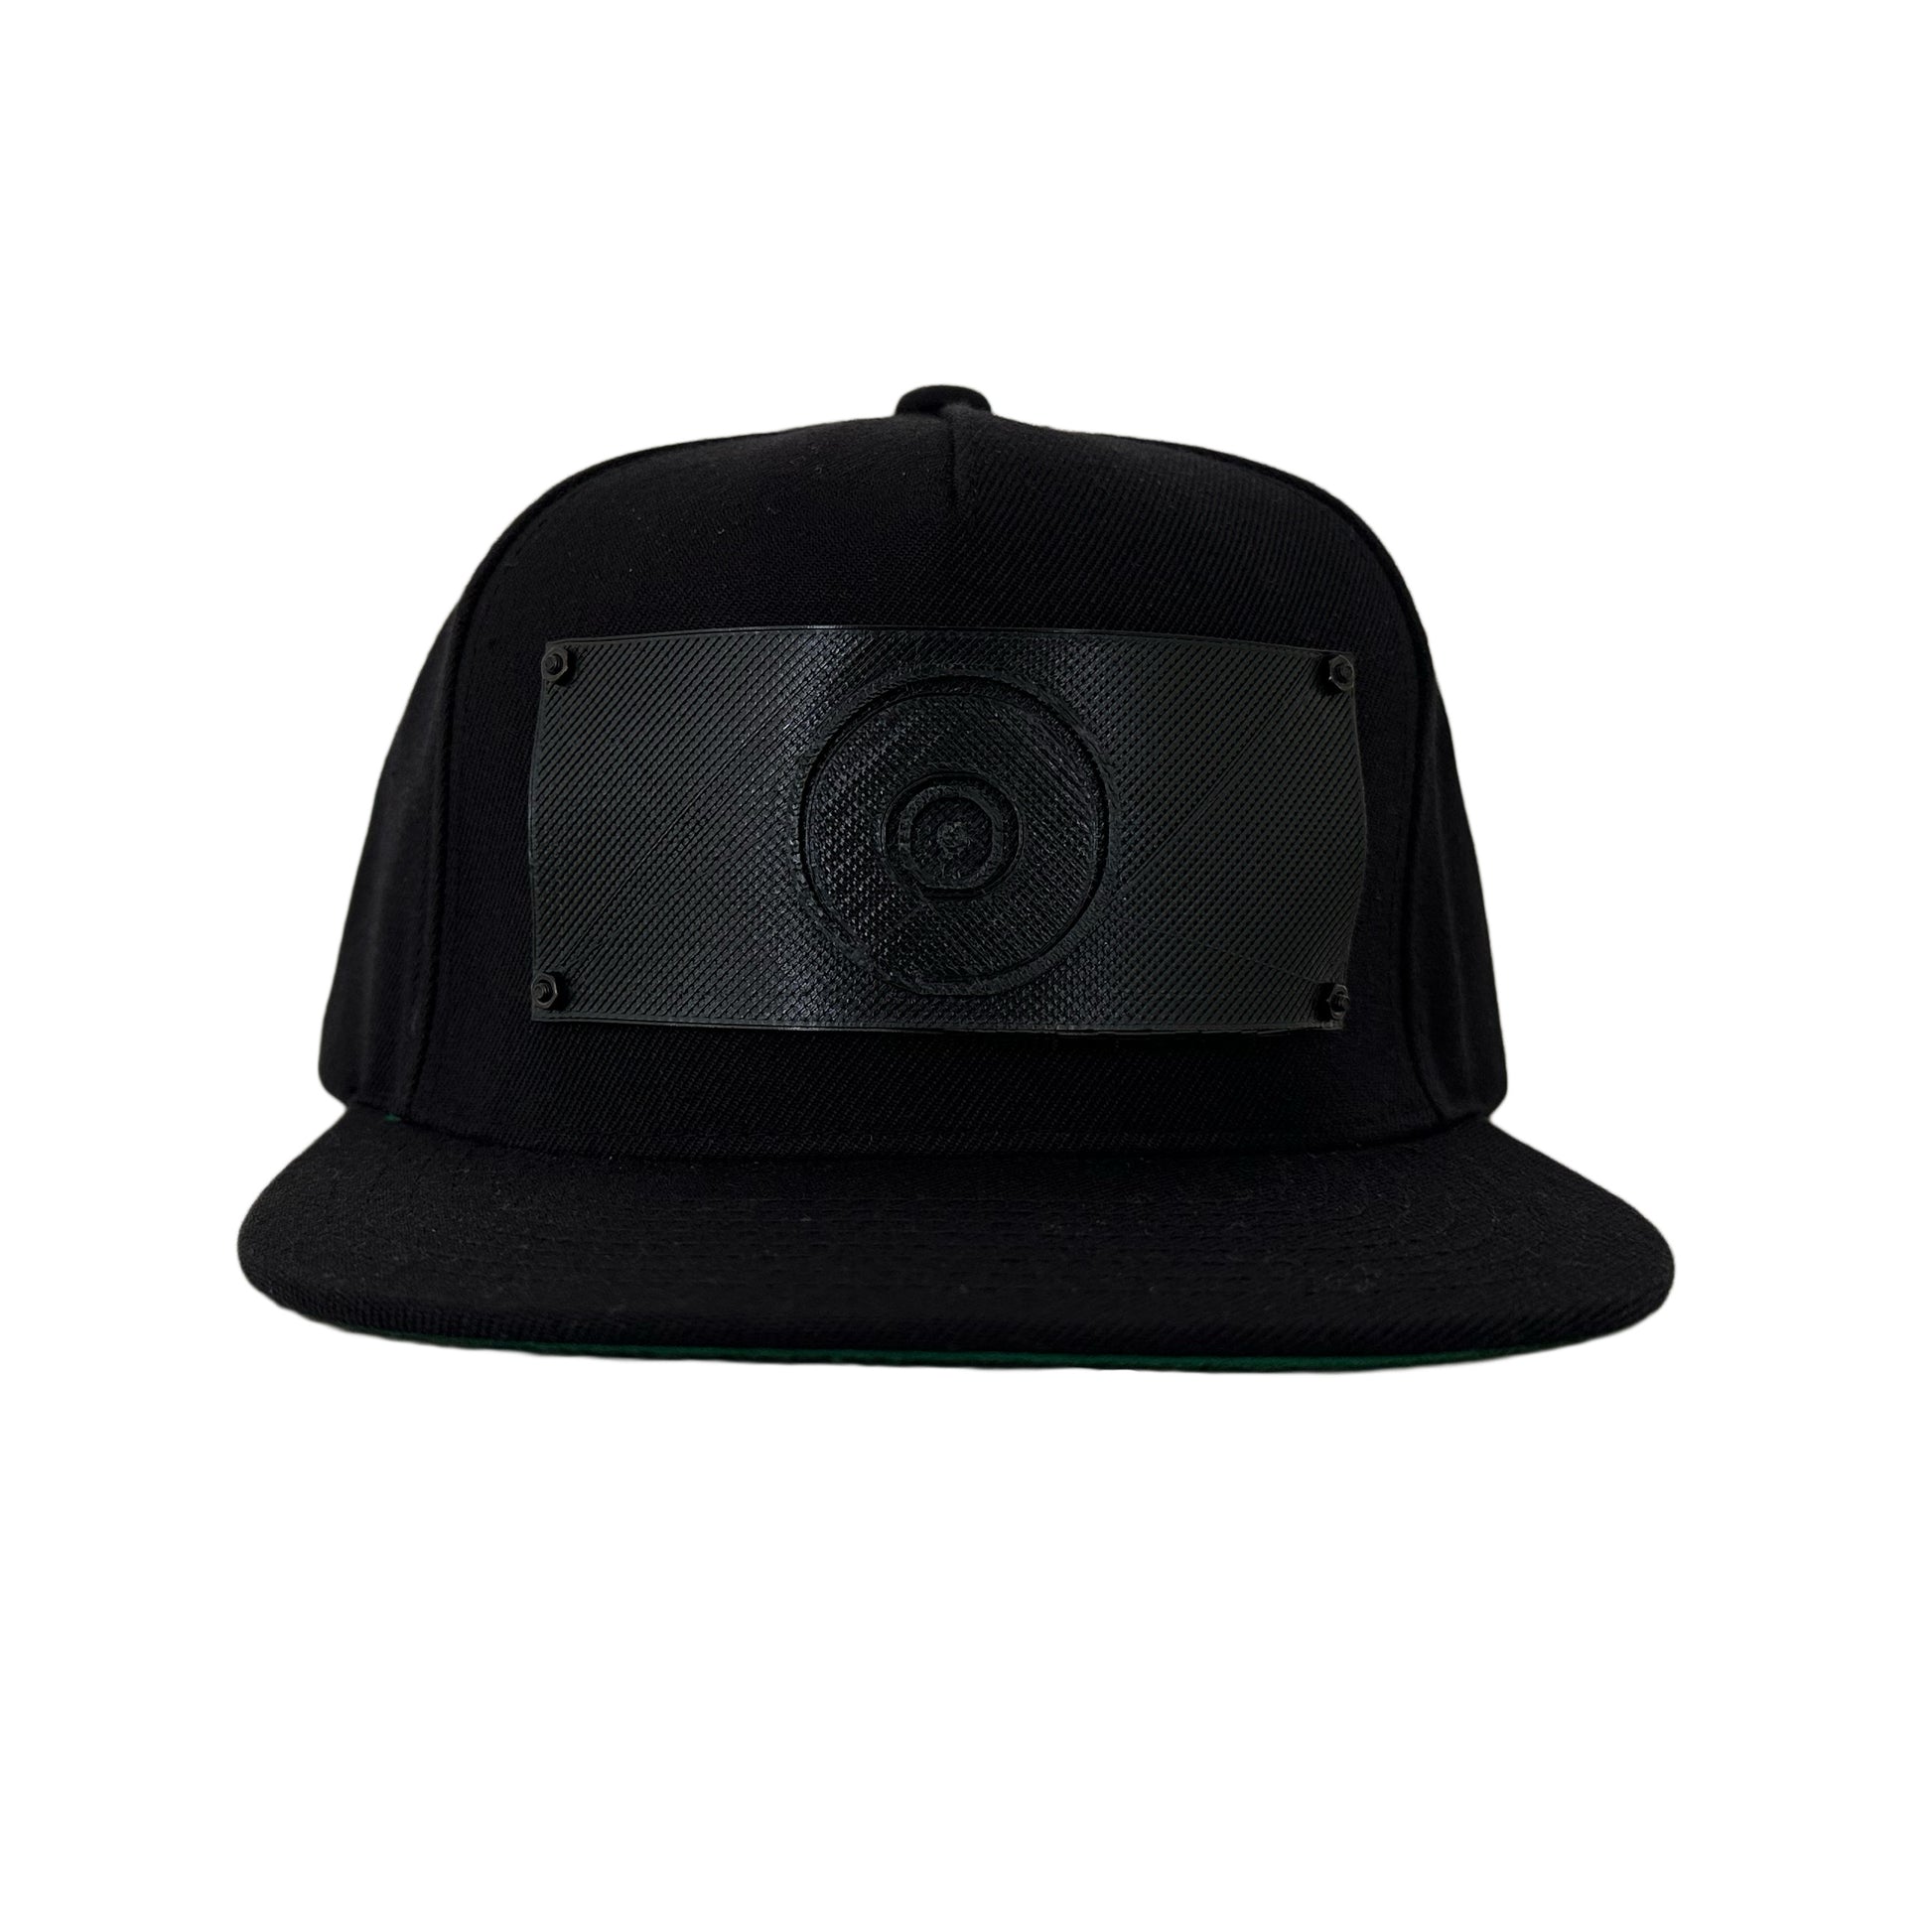 A black snapback baseball hat with a 3D printed black logo panel  with an evil eye symbol on it.